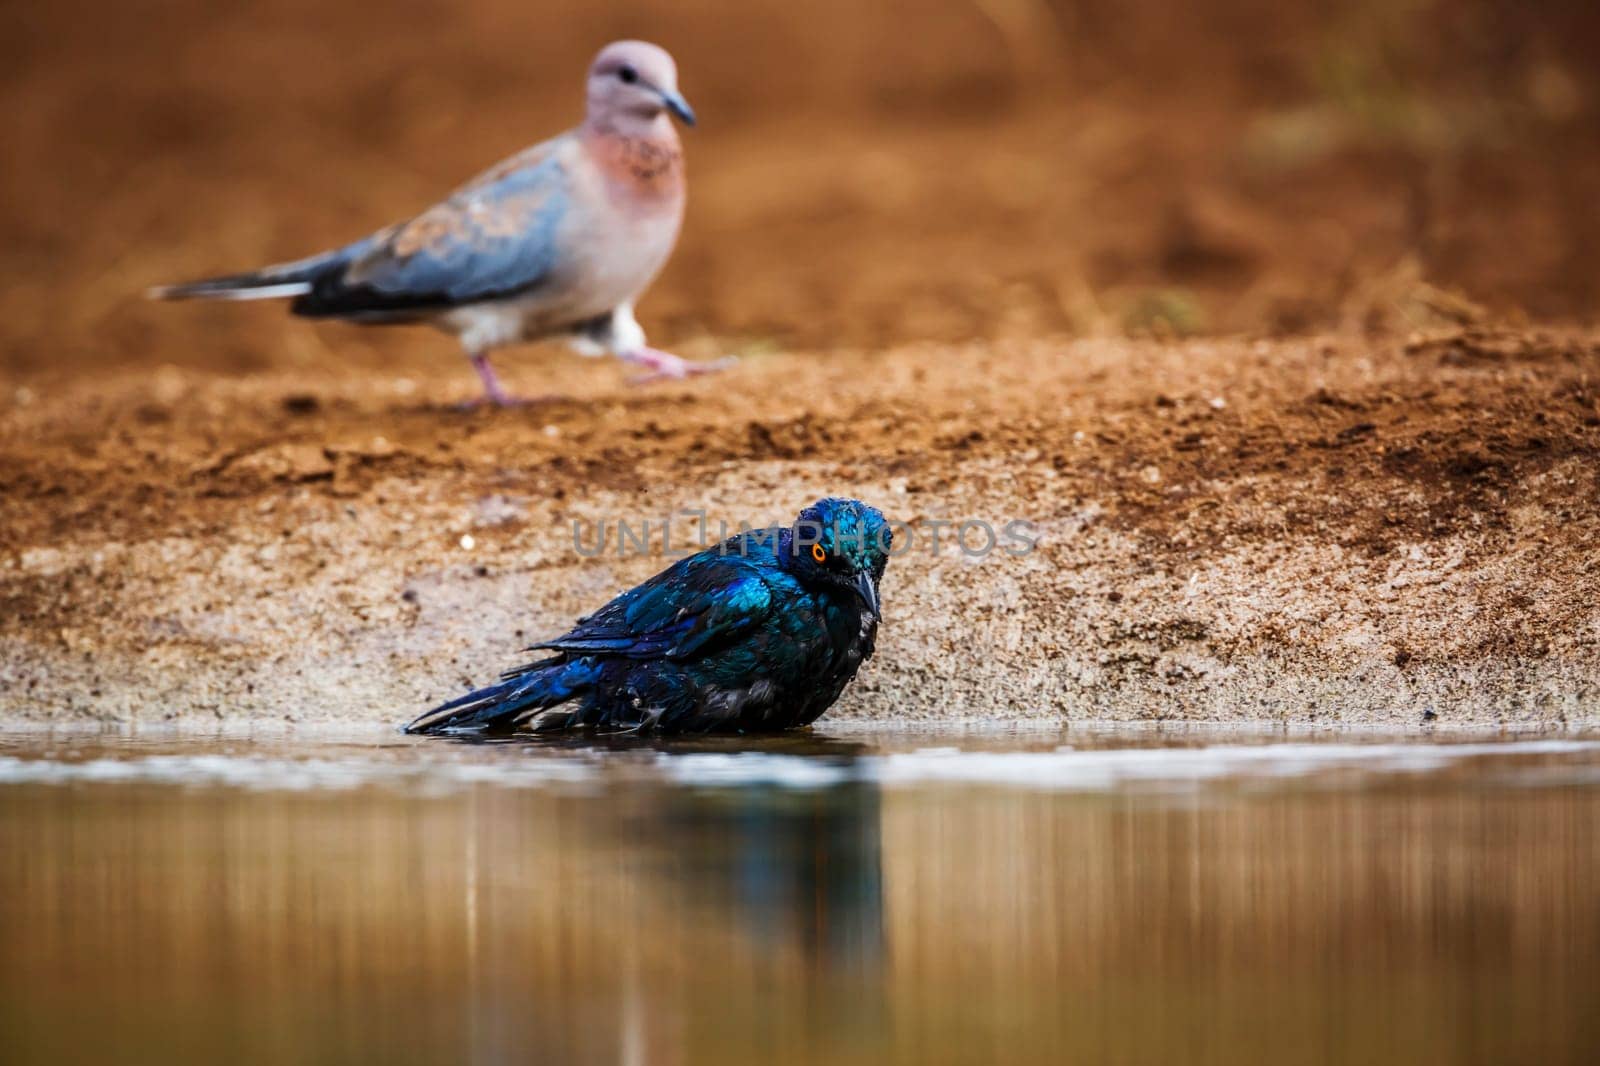 Cape Glossy Starling bathing in waterhole in Kruger National park, South Africa ; Specie Lamprotornis nitens family of Sturnidae